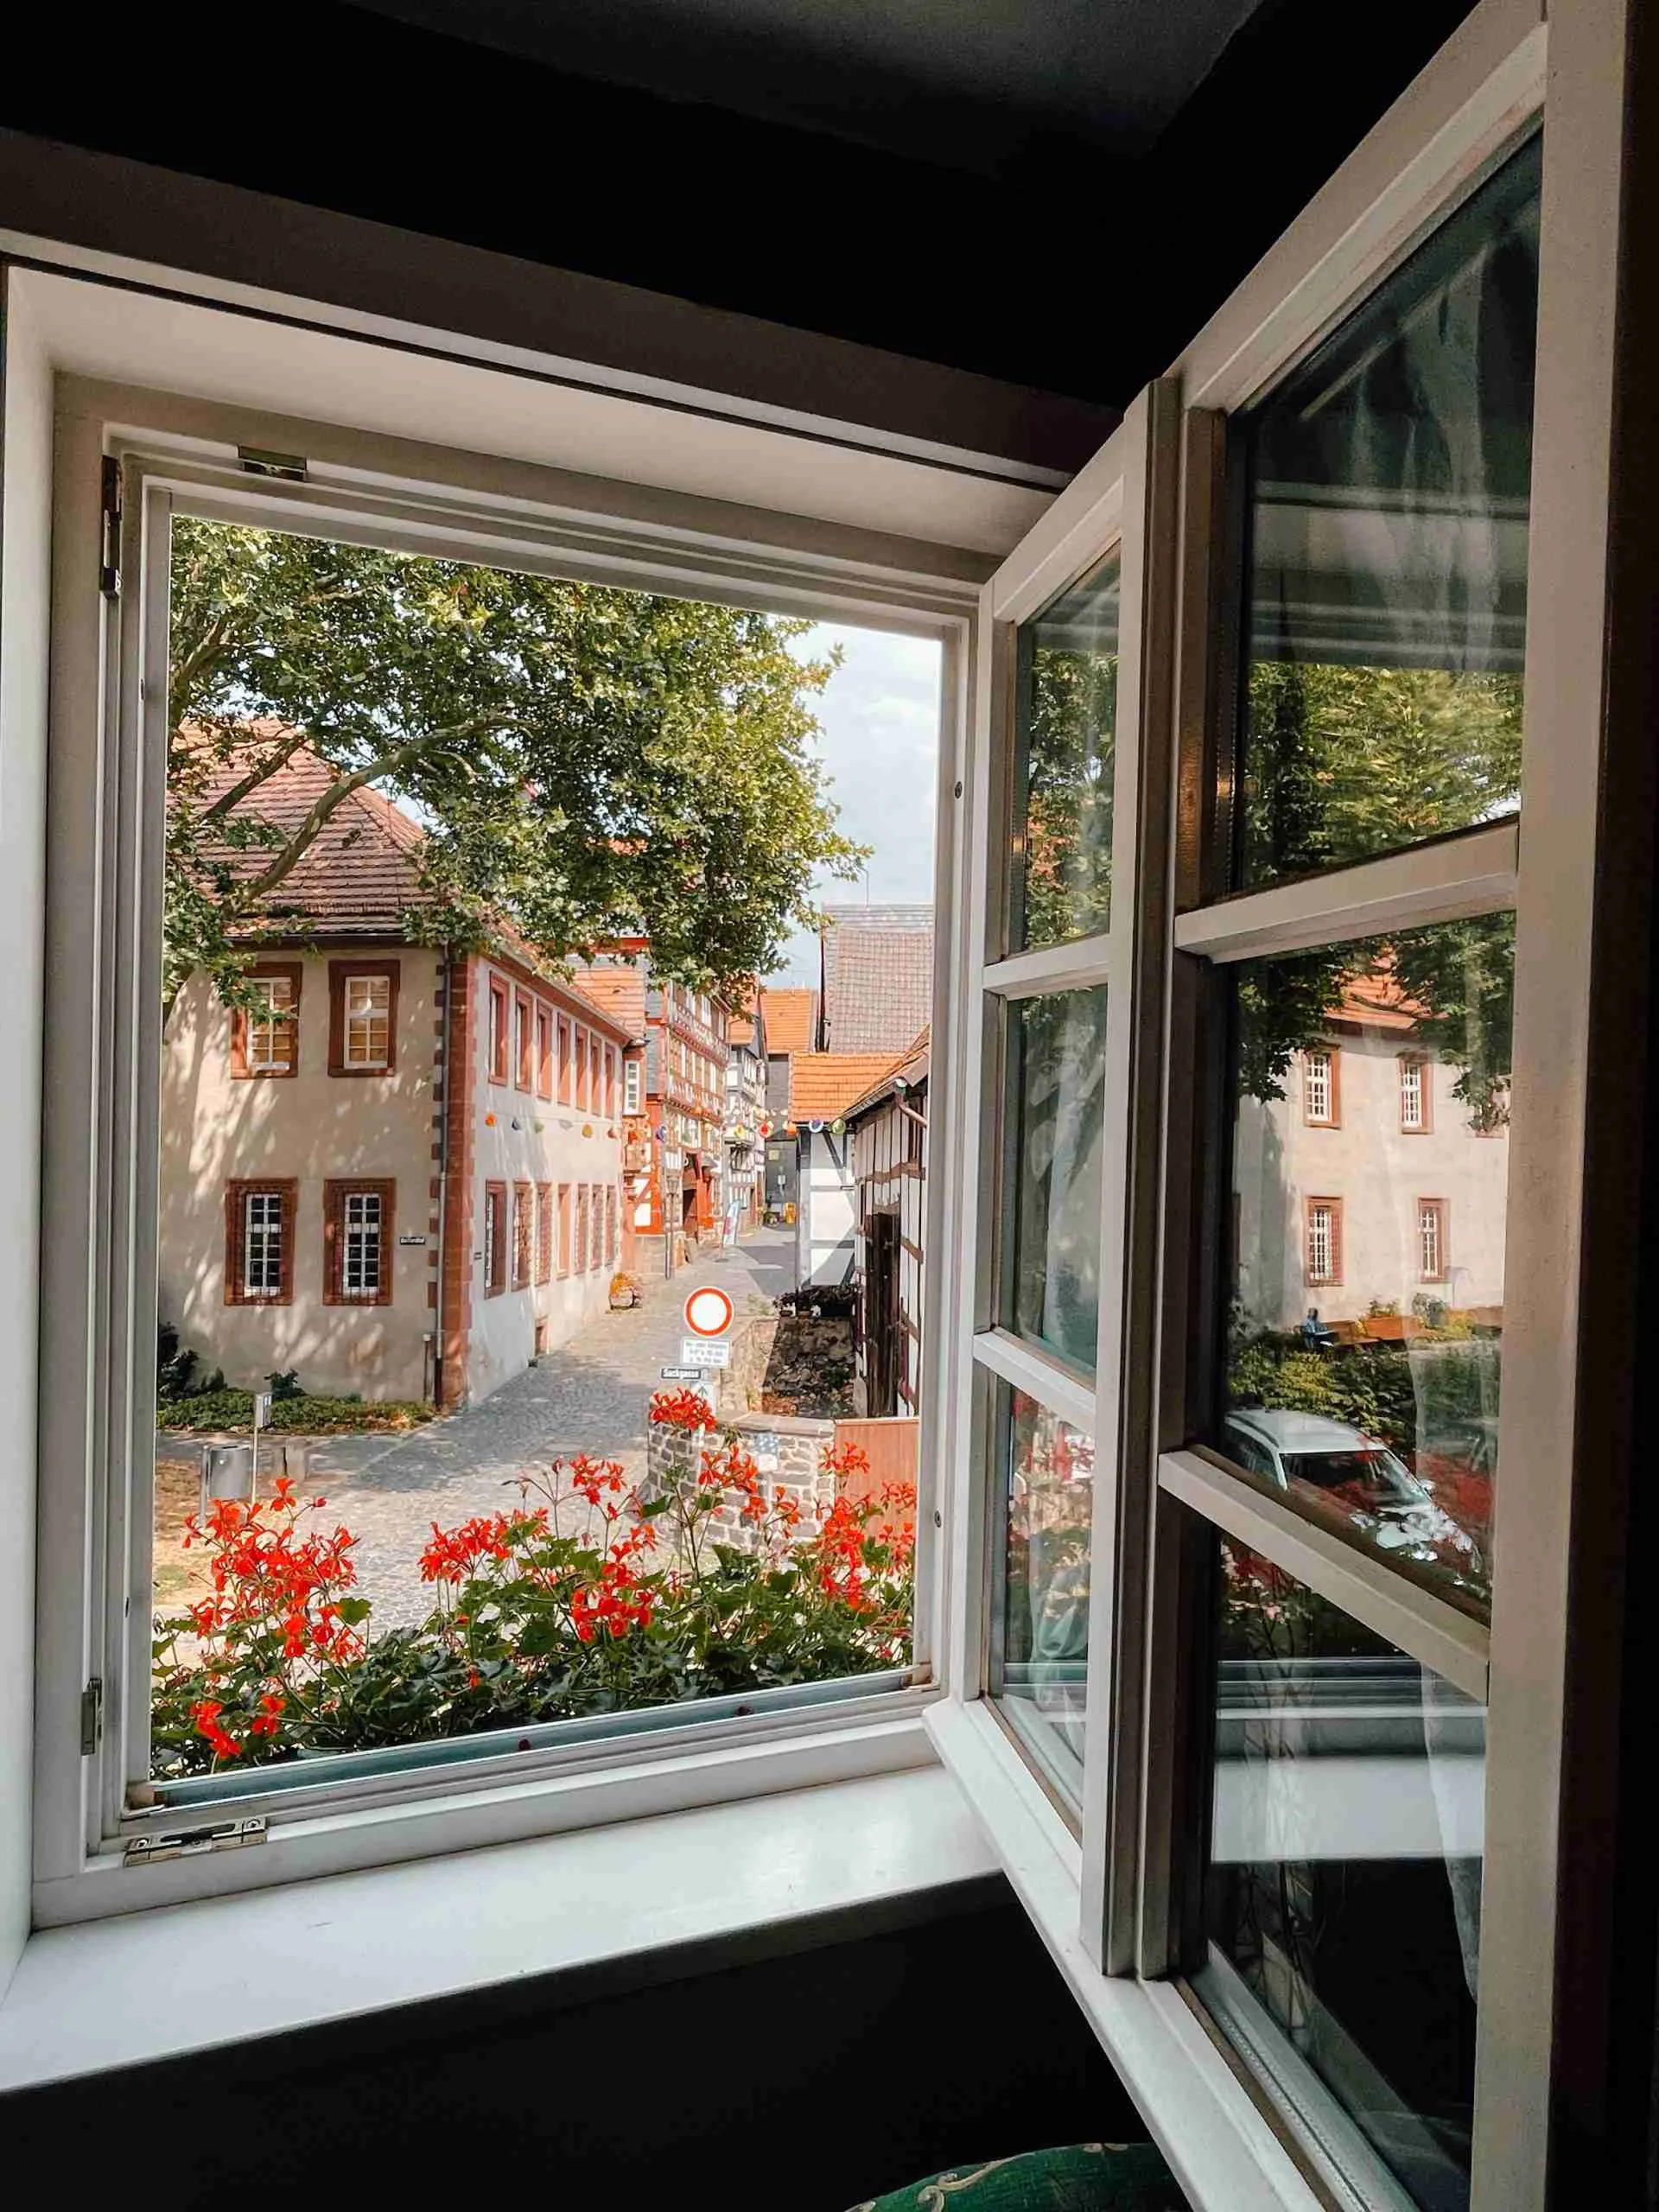 The view from inside the fairytale house in Alsfeld 